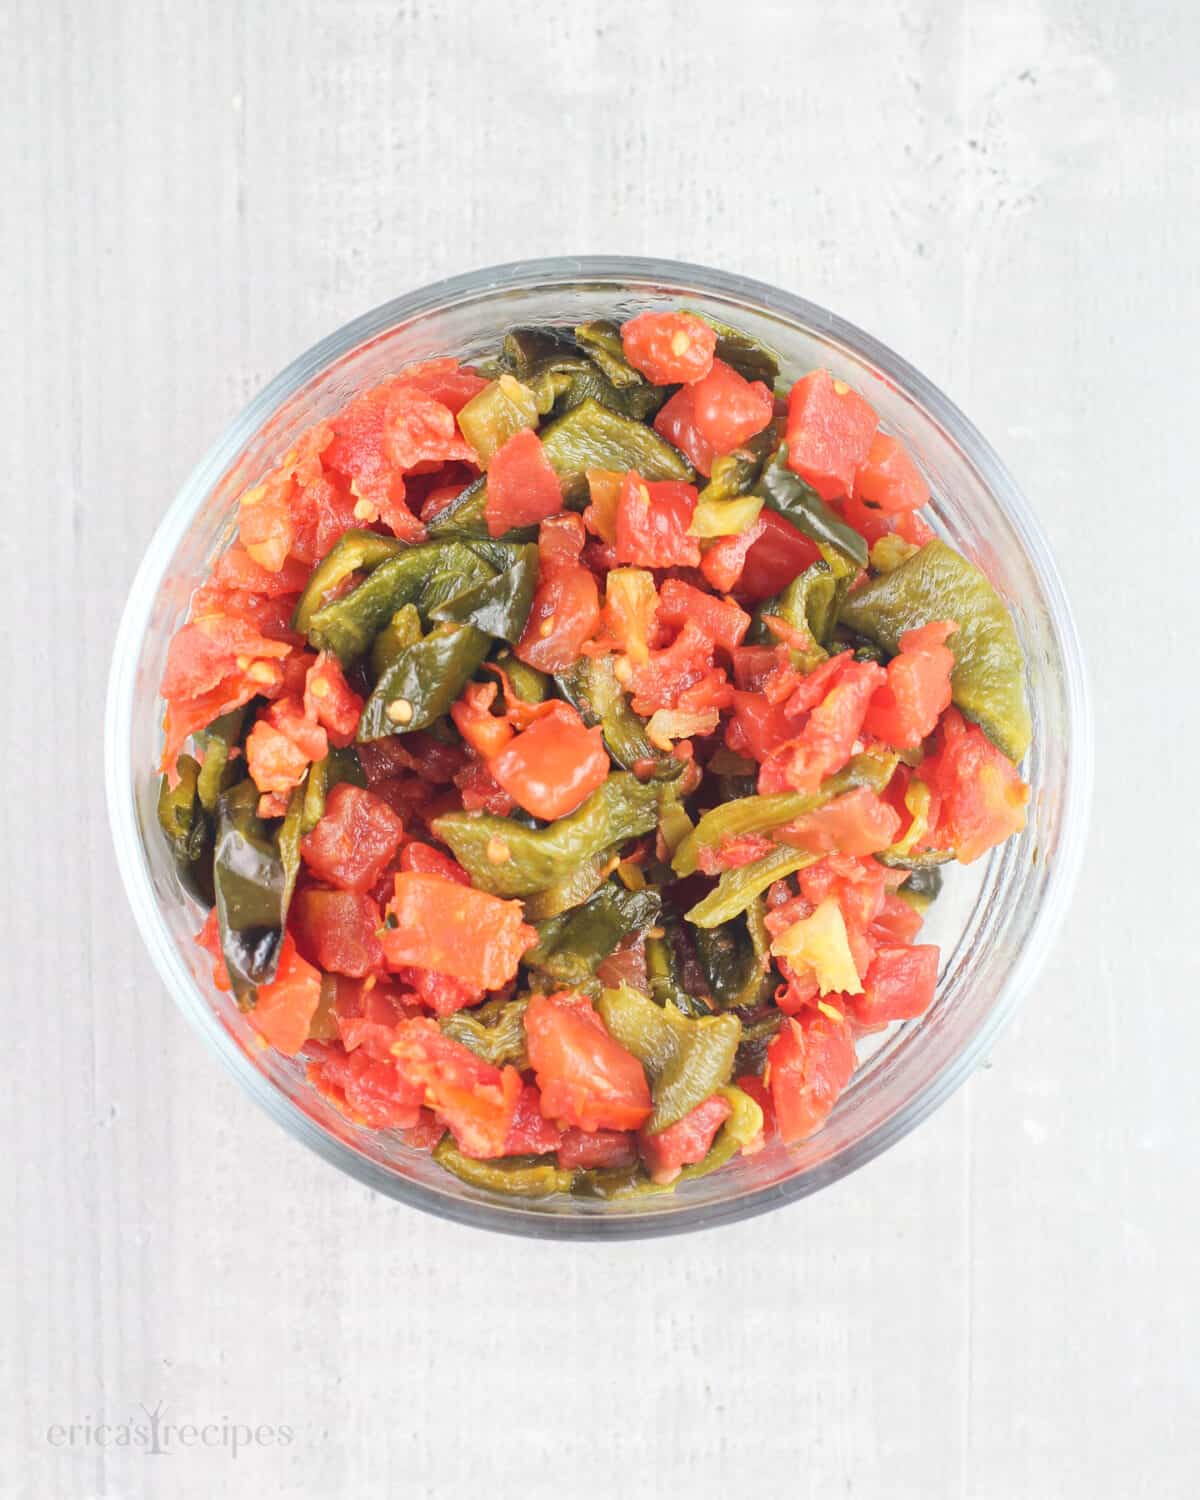 chopped tomatoes, green chiles, and poblano pepper in glass dish